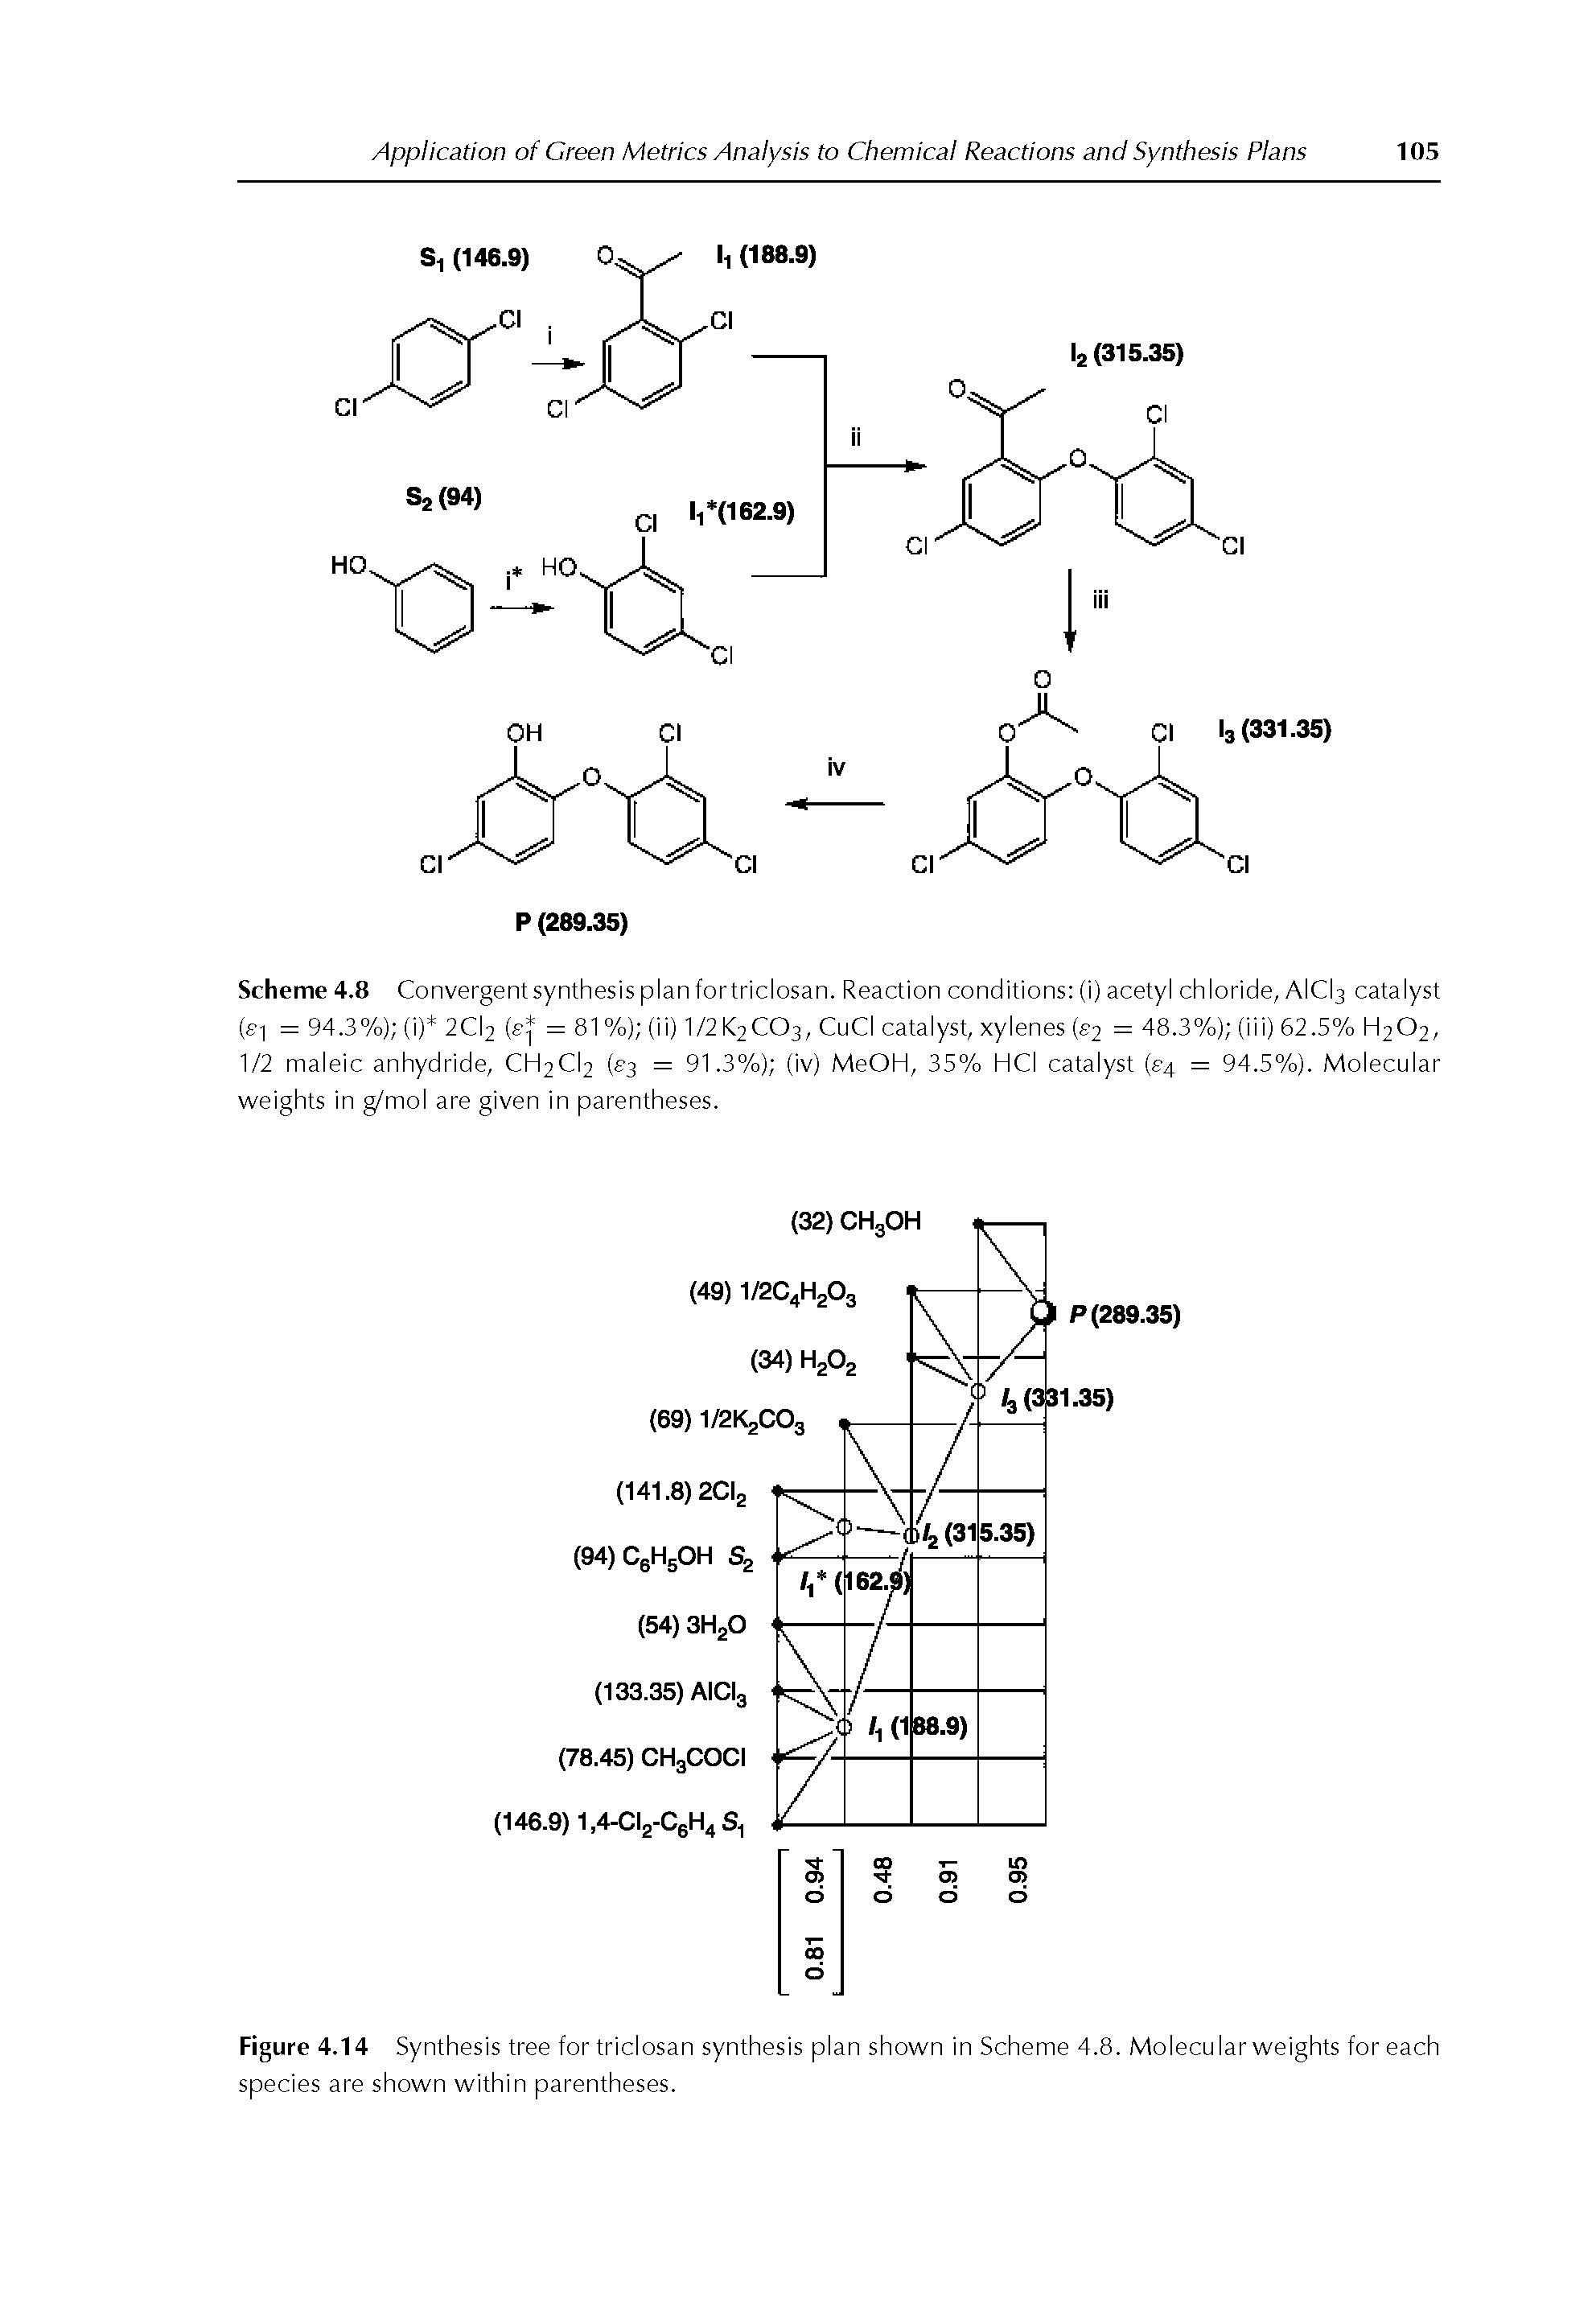 Figure 4.14 Synthesis tree for triclosan synthesis plan shown in Scheme 4.8. Molecular weights for each species are shown within parentheses.